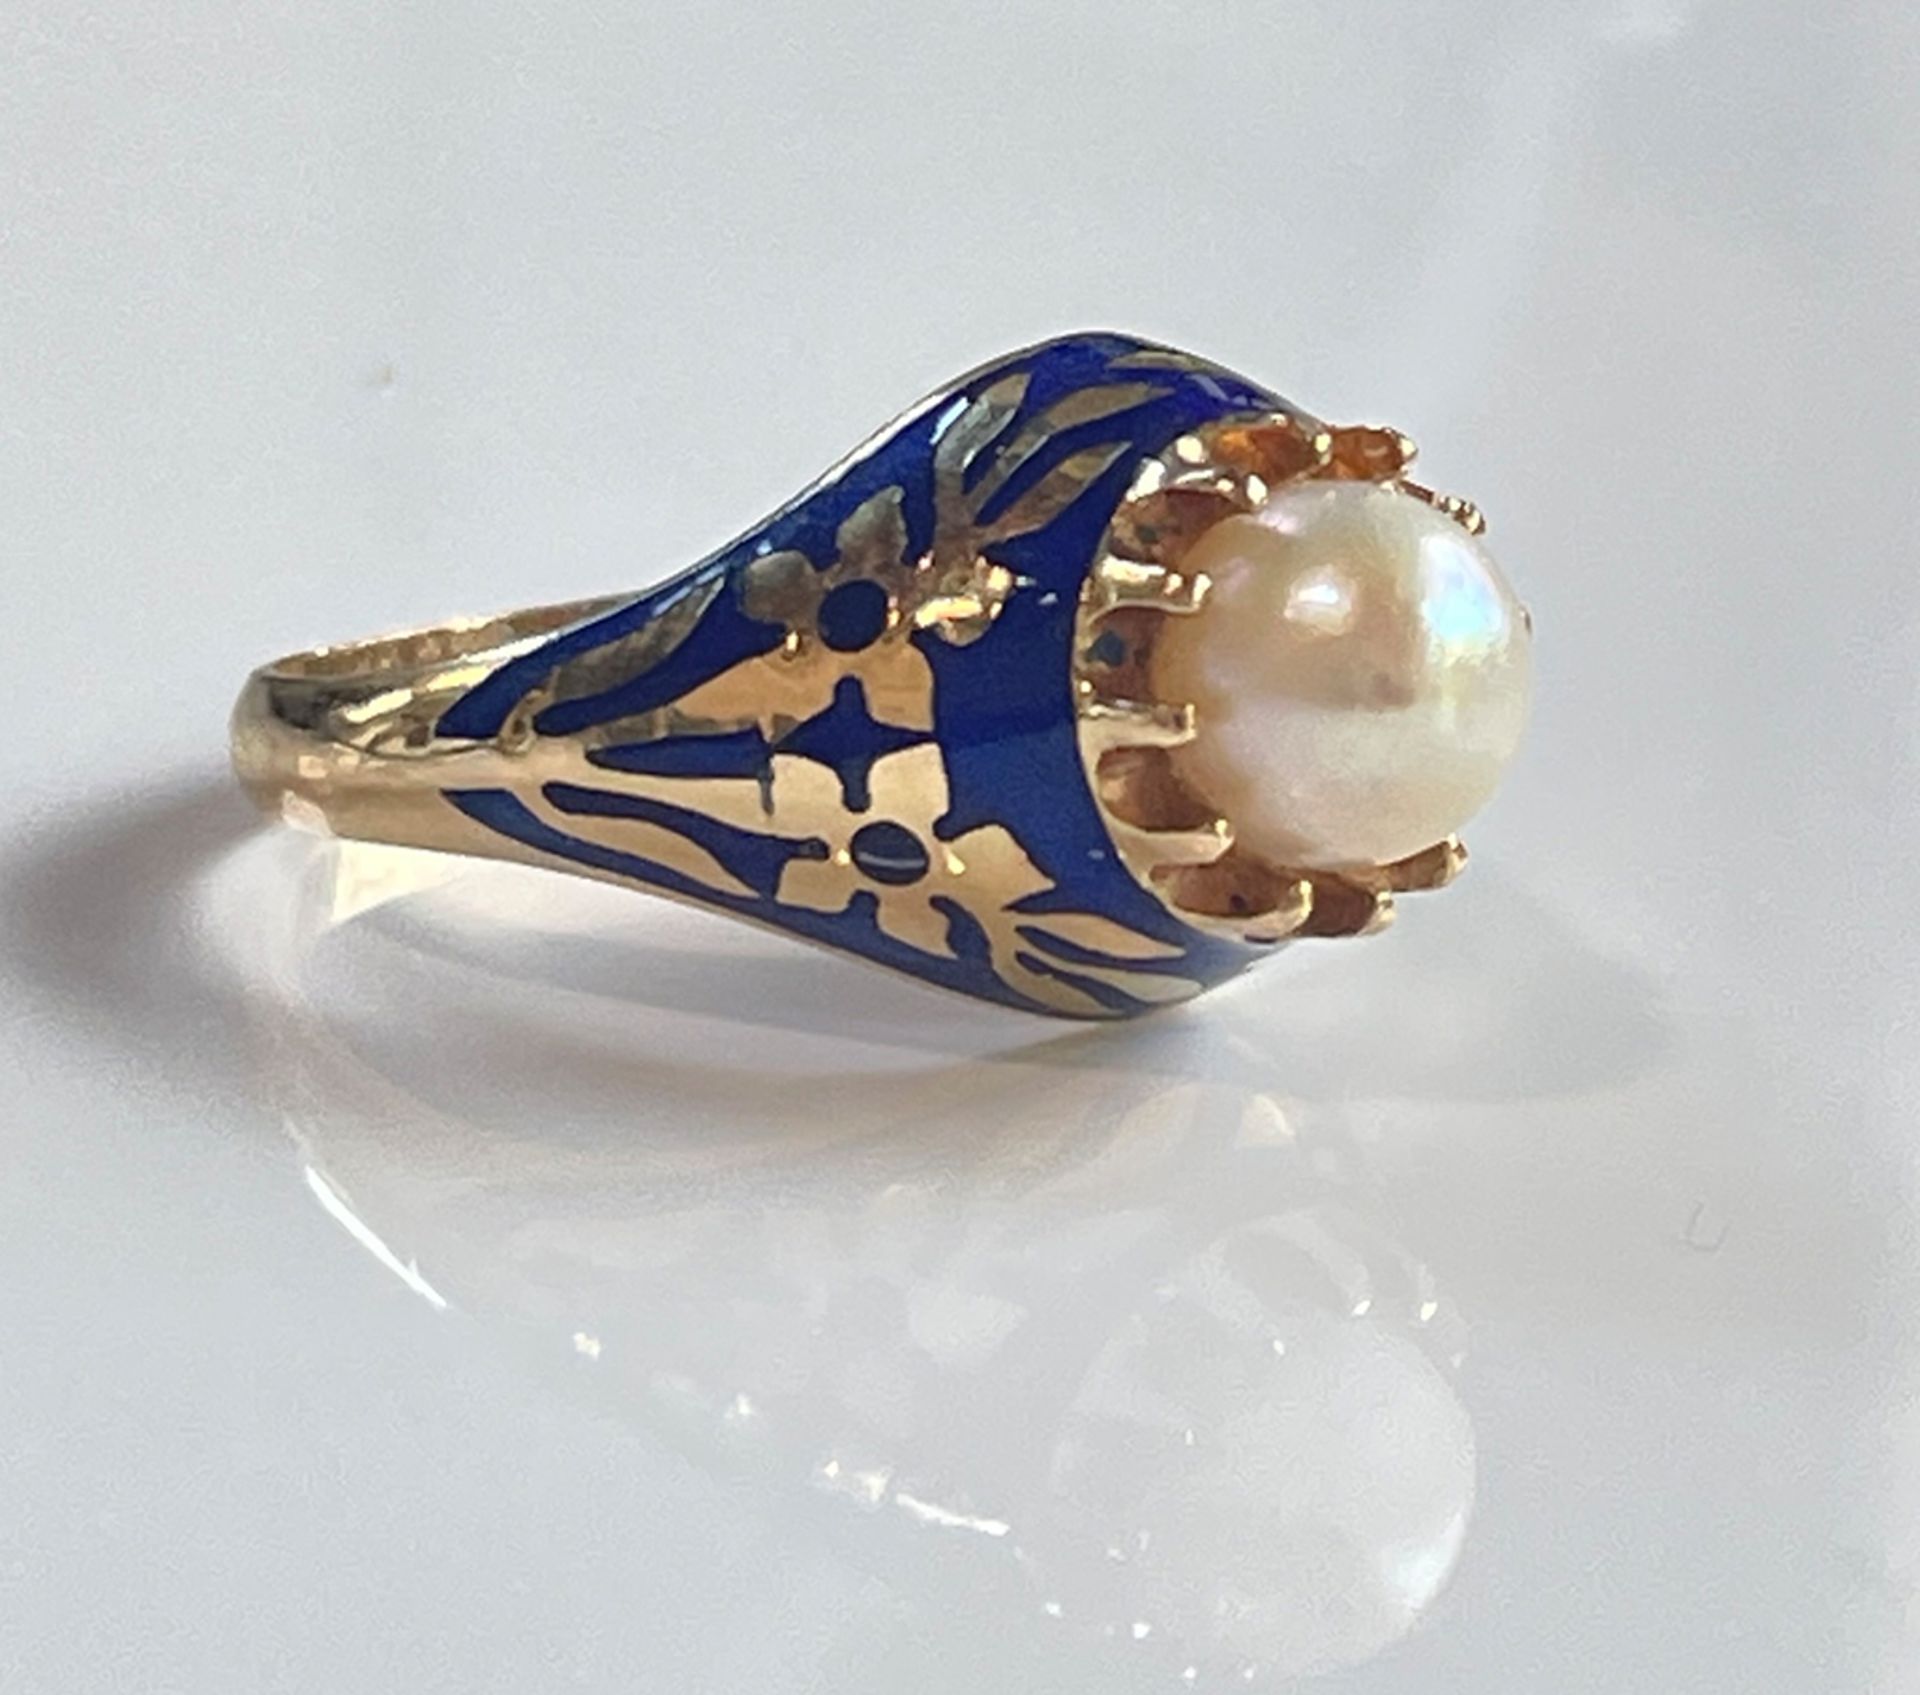 Antique ring of 18K Gold with Enamel and a Pearl - Image 3 of 5